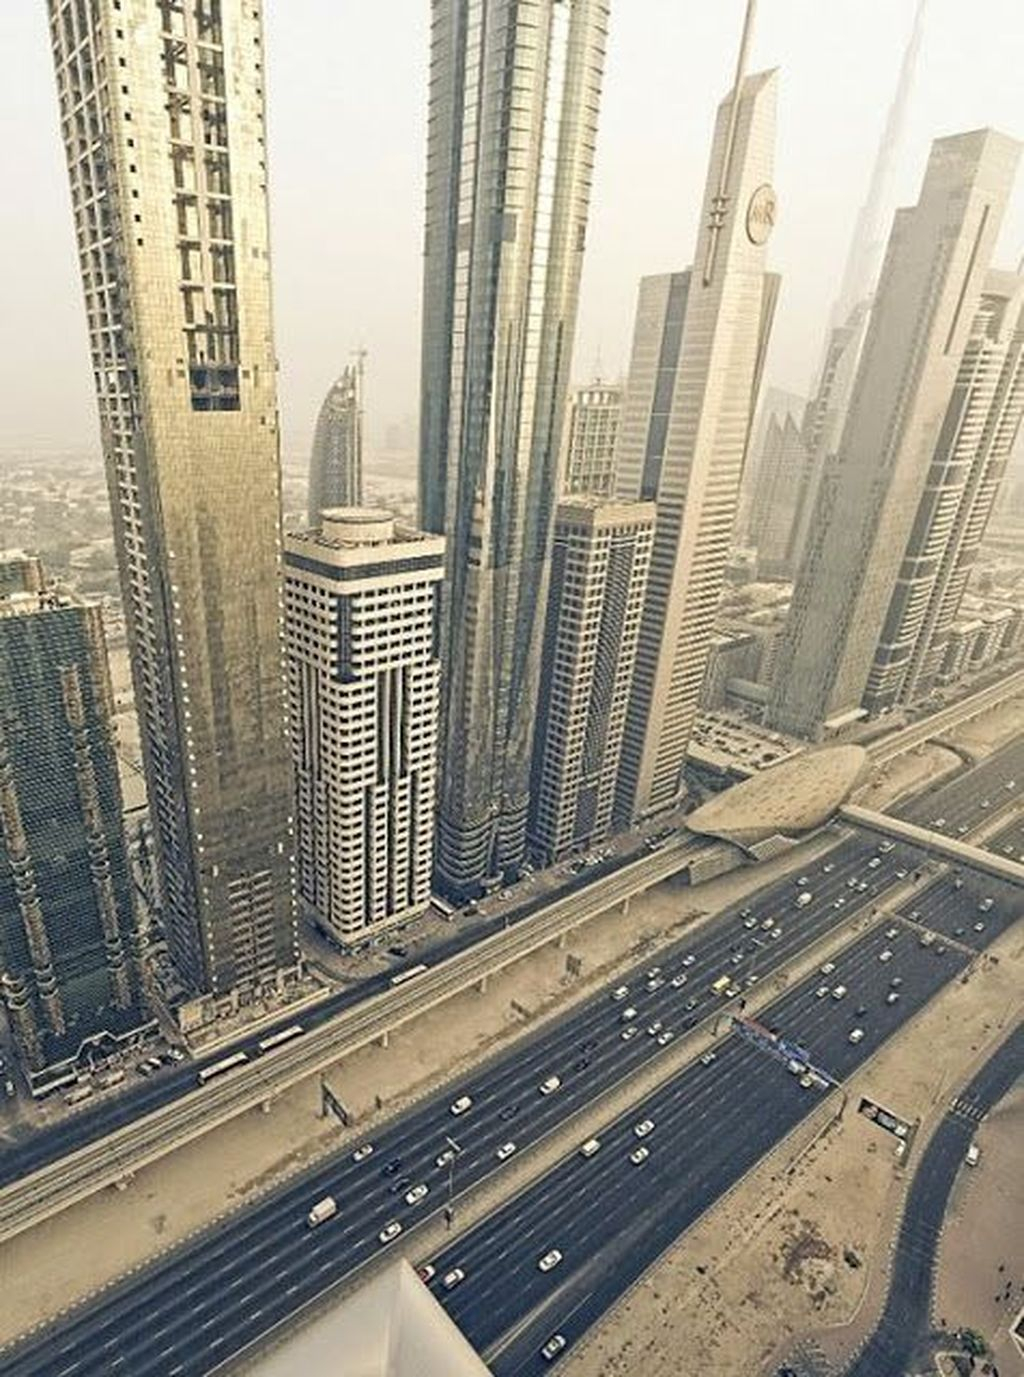 Awesome Photos Of Dubai To Make You Want To Visit It50